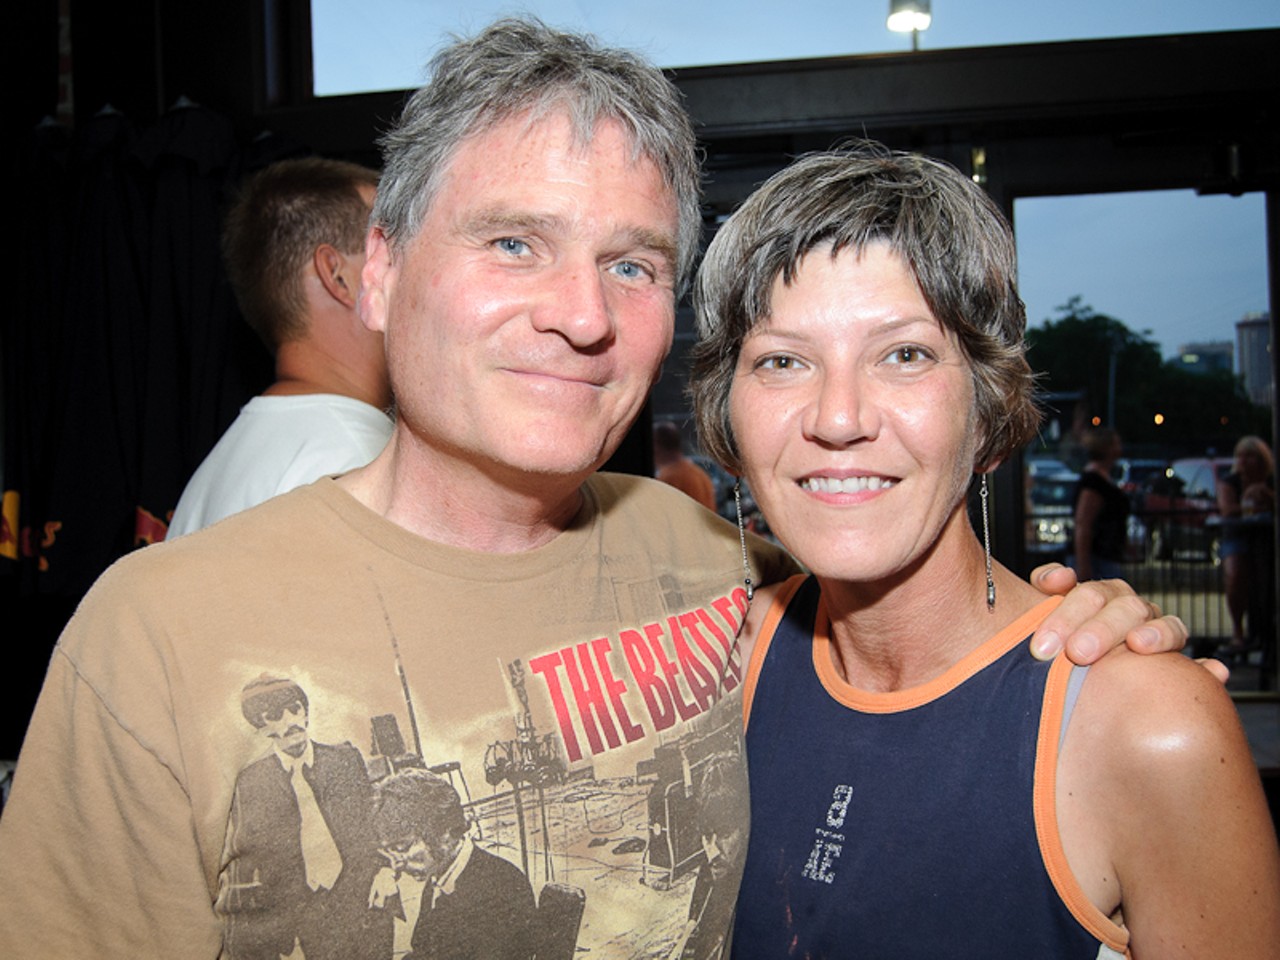 Dave Udell and Valerie Pennington got introduced to Uncle Tupelo by mistake (heckling the band at their CD release show) but grew to love them.